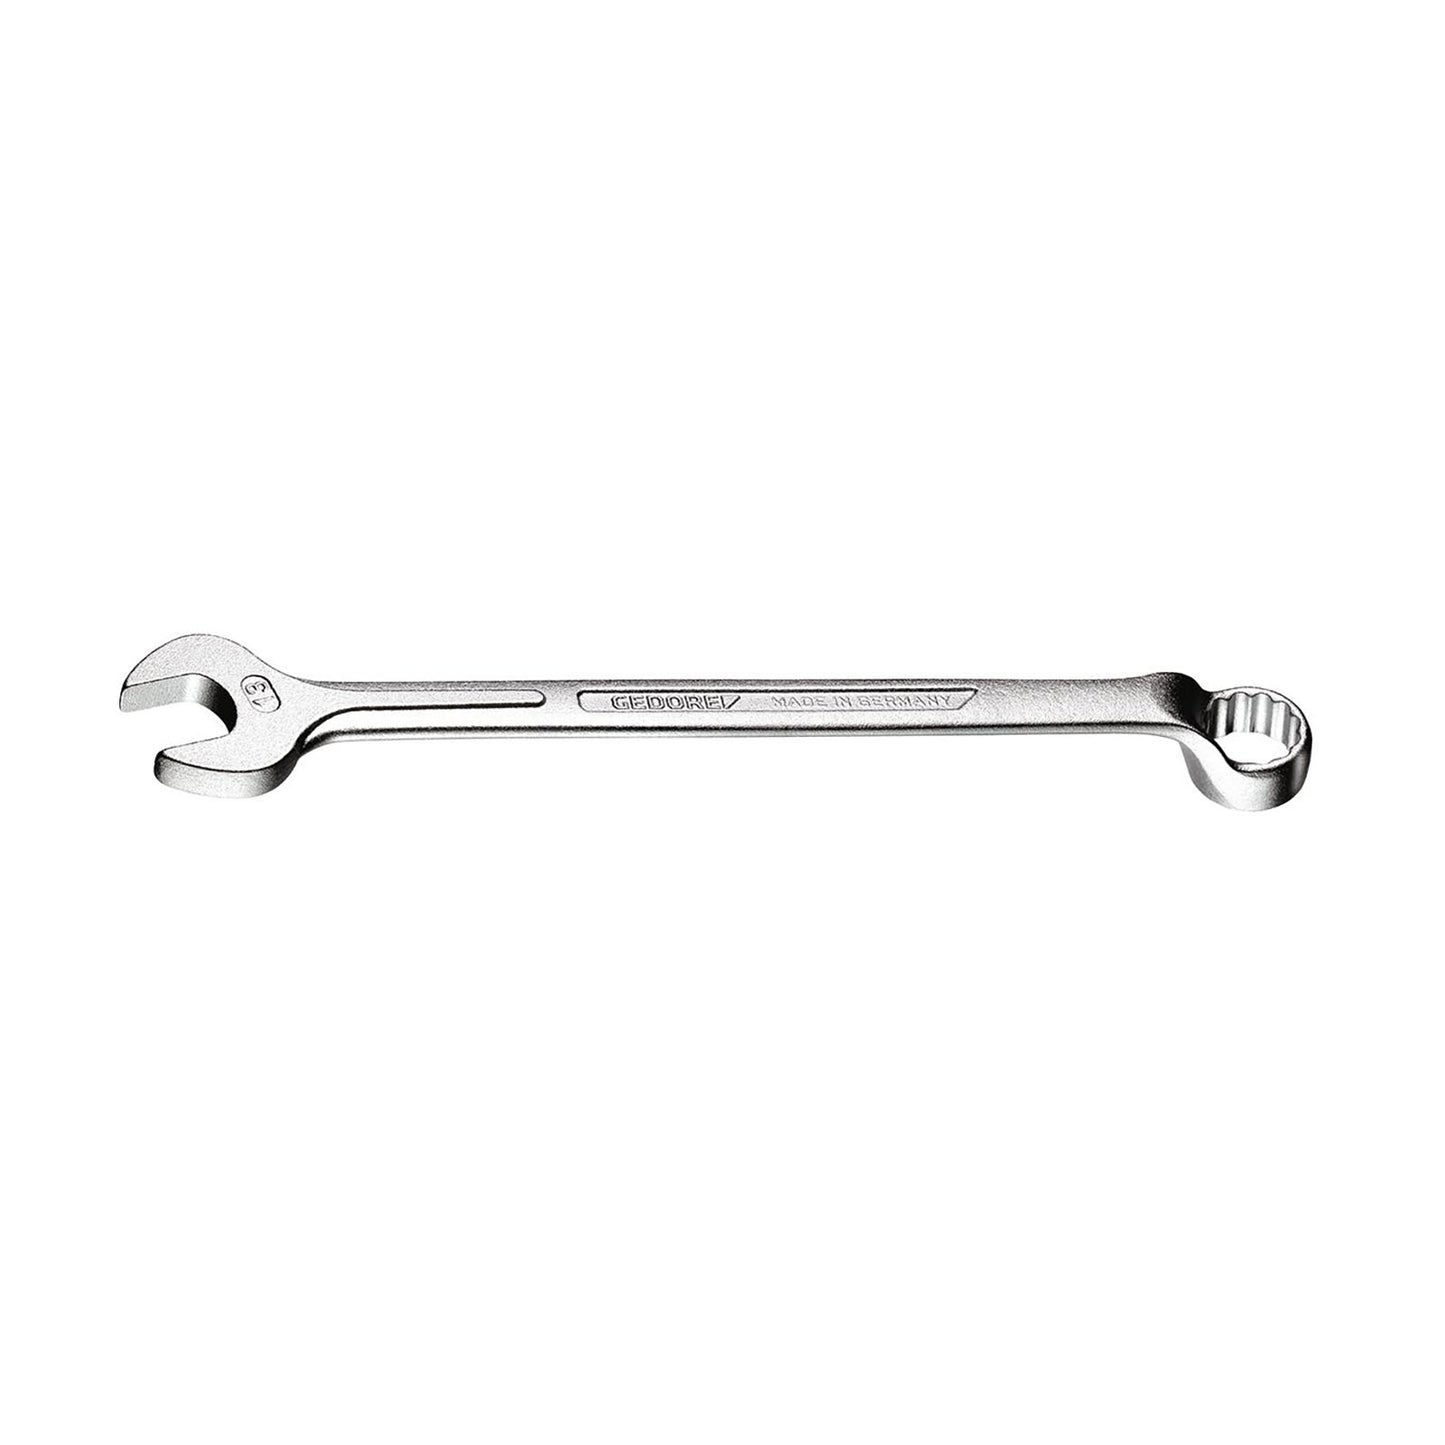 GEDORE 1 B 7/16W - Offset Combination Wrench, 7/16W (6010040)